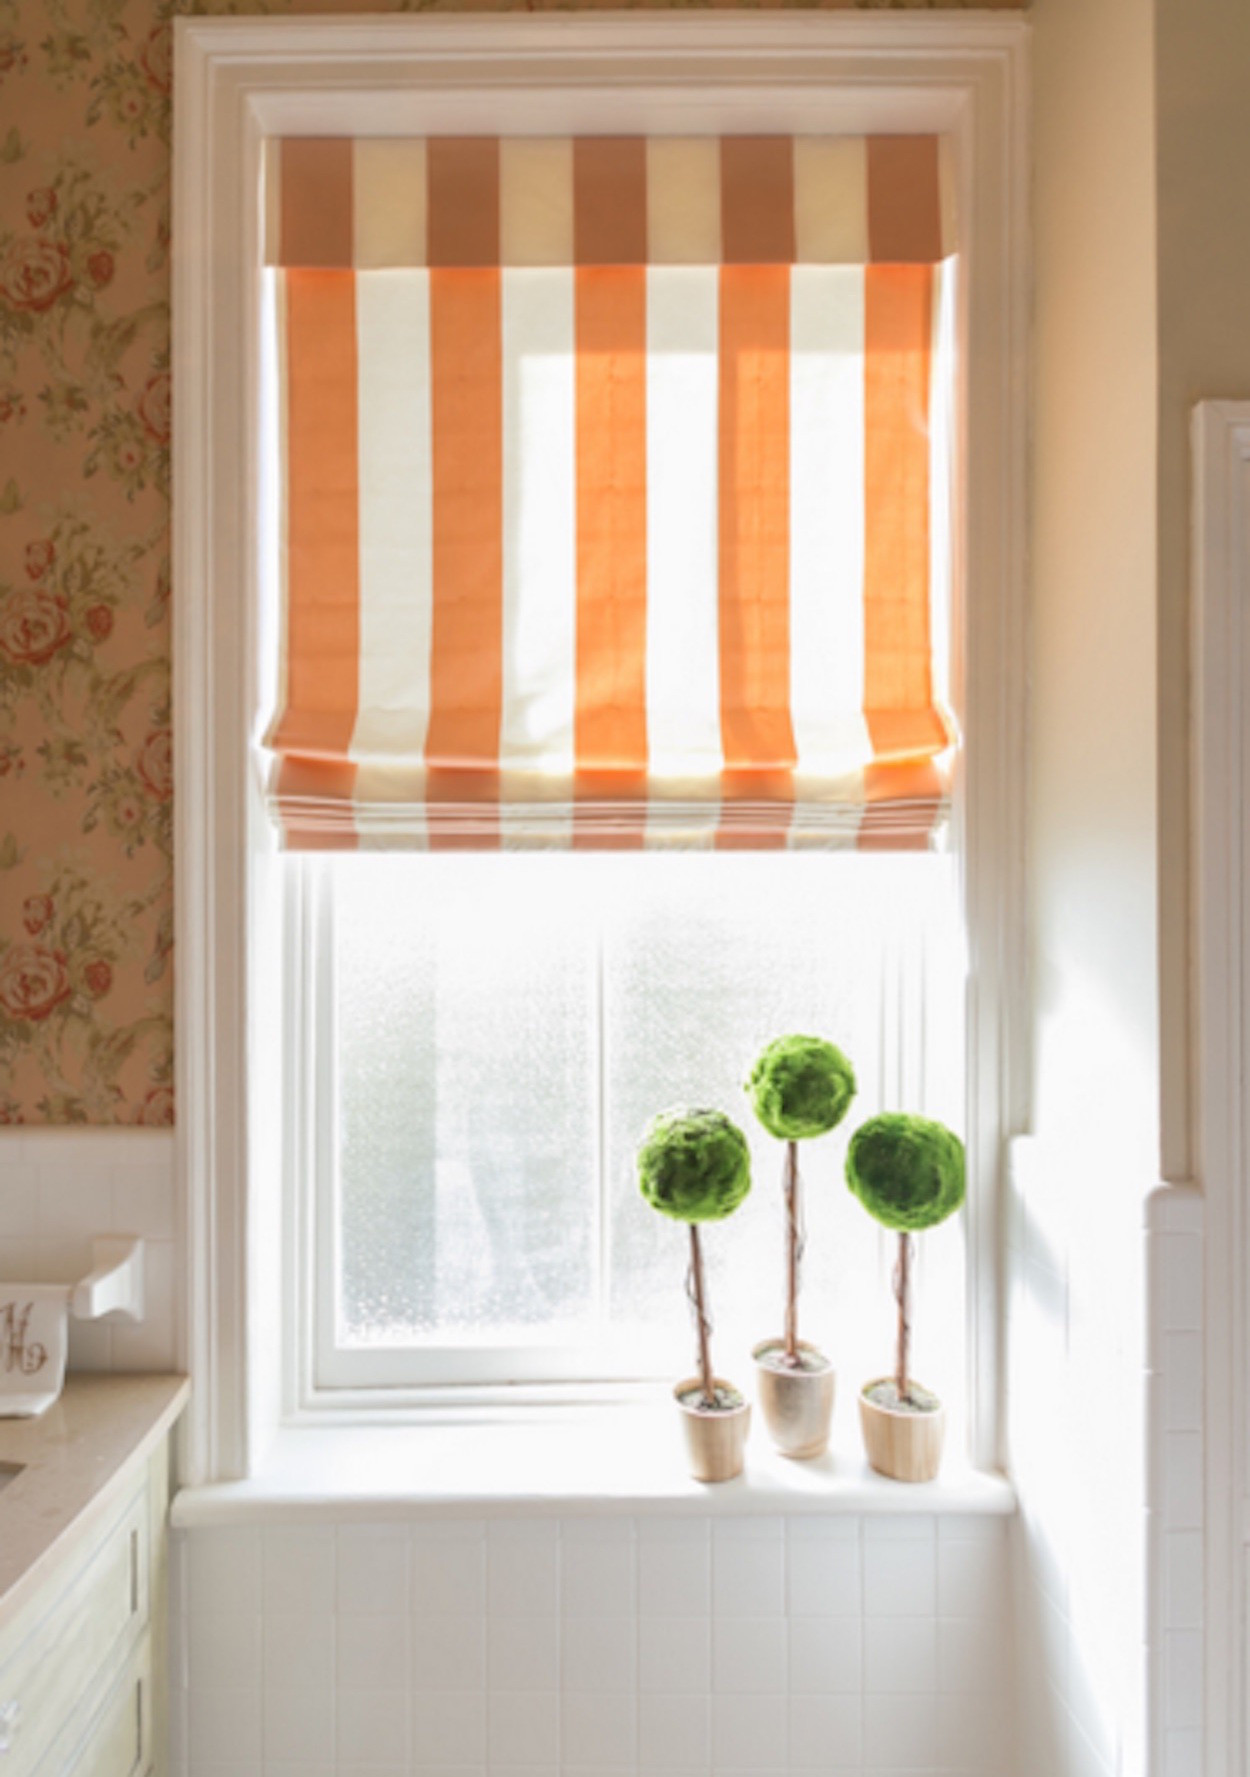 Bathroom Valances Small Windows
 7 Different Bathroom Window Treatments You Might Not Have